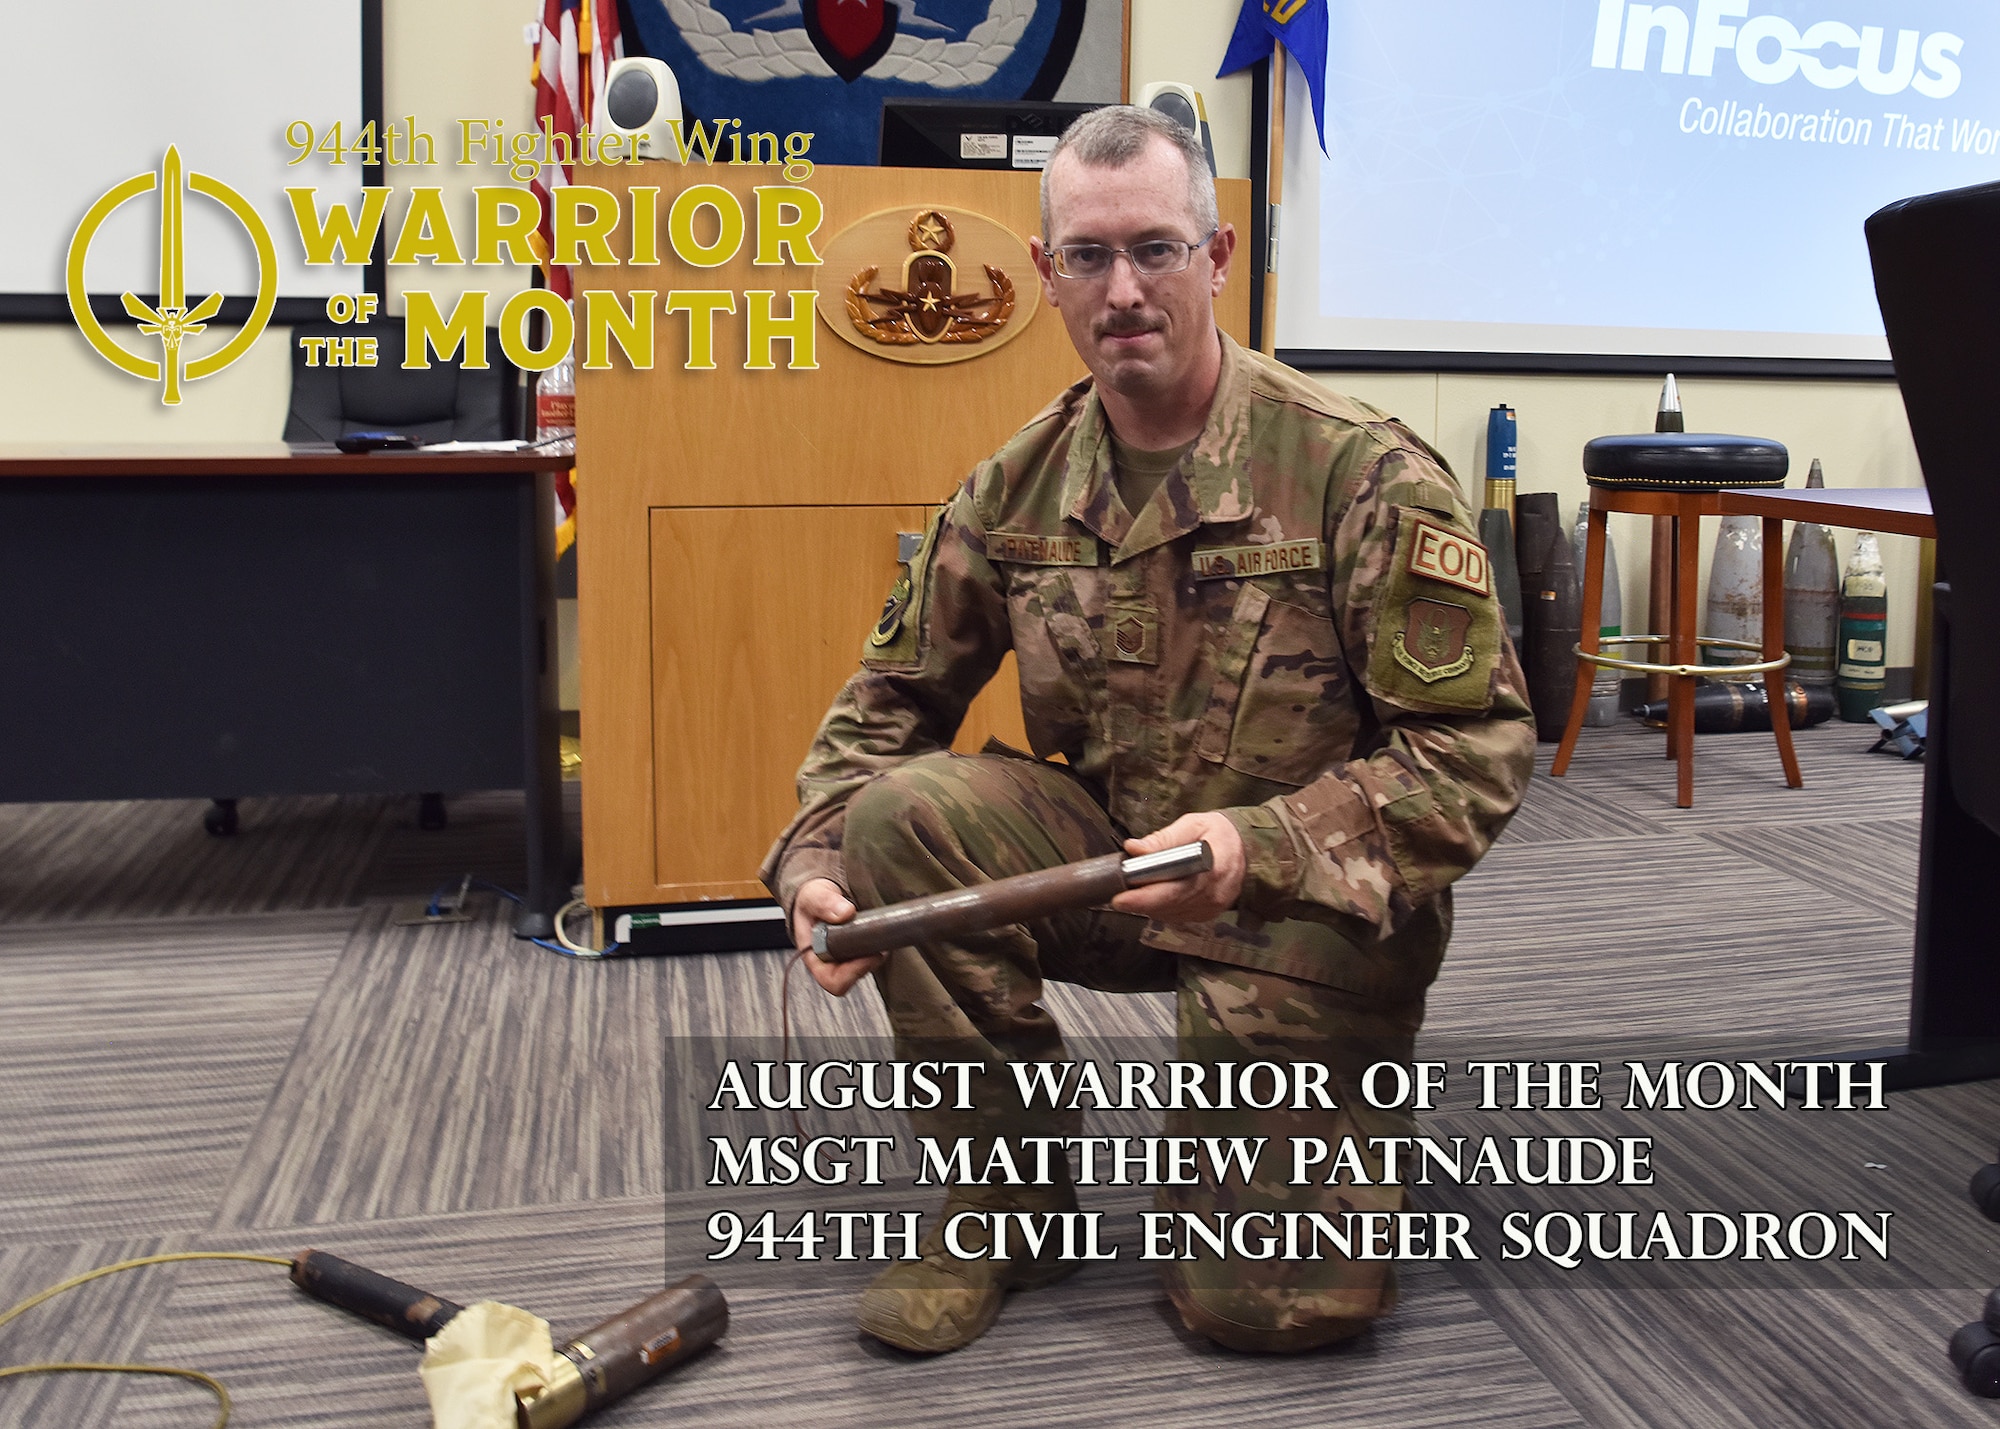 The 944th Fighter Wing Warrior of the Month for August 2021 is Reserve Citizen Airman Master Sgt. Matthew Patnuade, 944th Civil Engineer Squadron Explosive Ordnance Disposal flight chief.